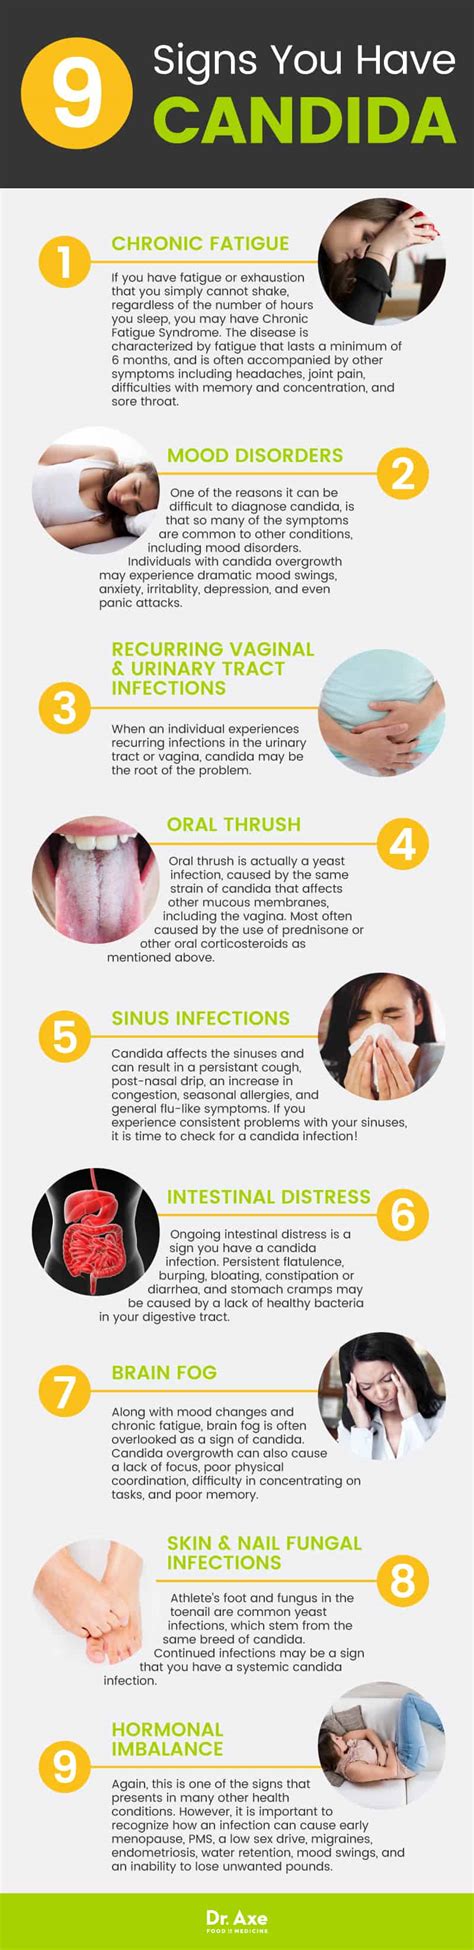 Candida Symptoms And 3 Steps To Treat Them Naturally Dr Axe